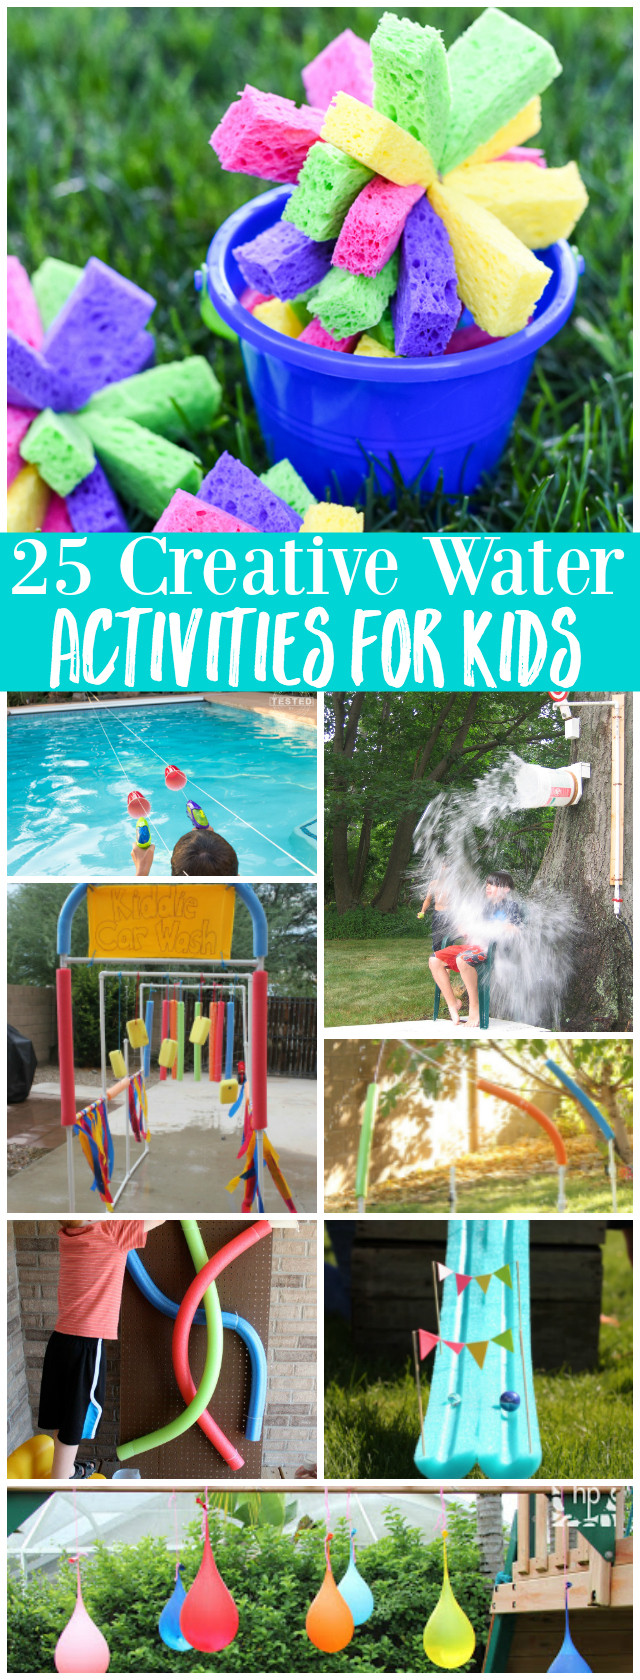 Fun Ideas For Kids
 25 Creative Water Activities for Kids